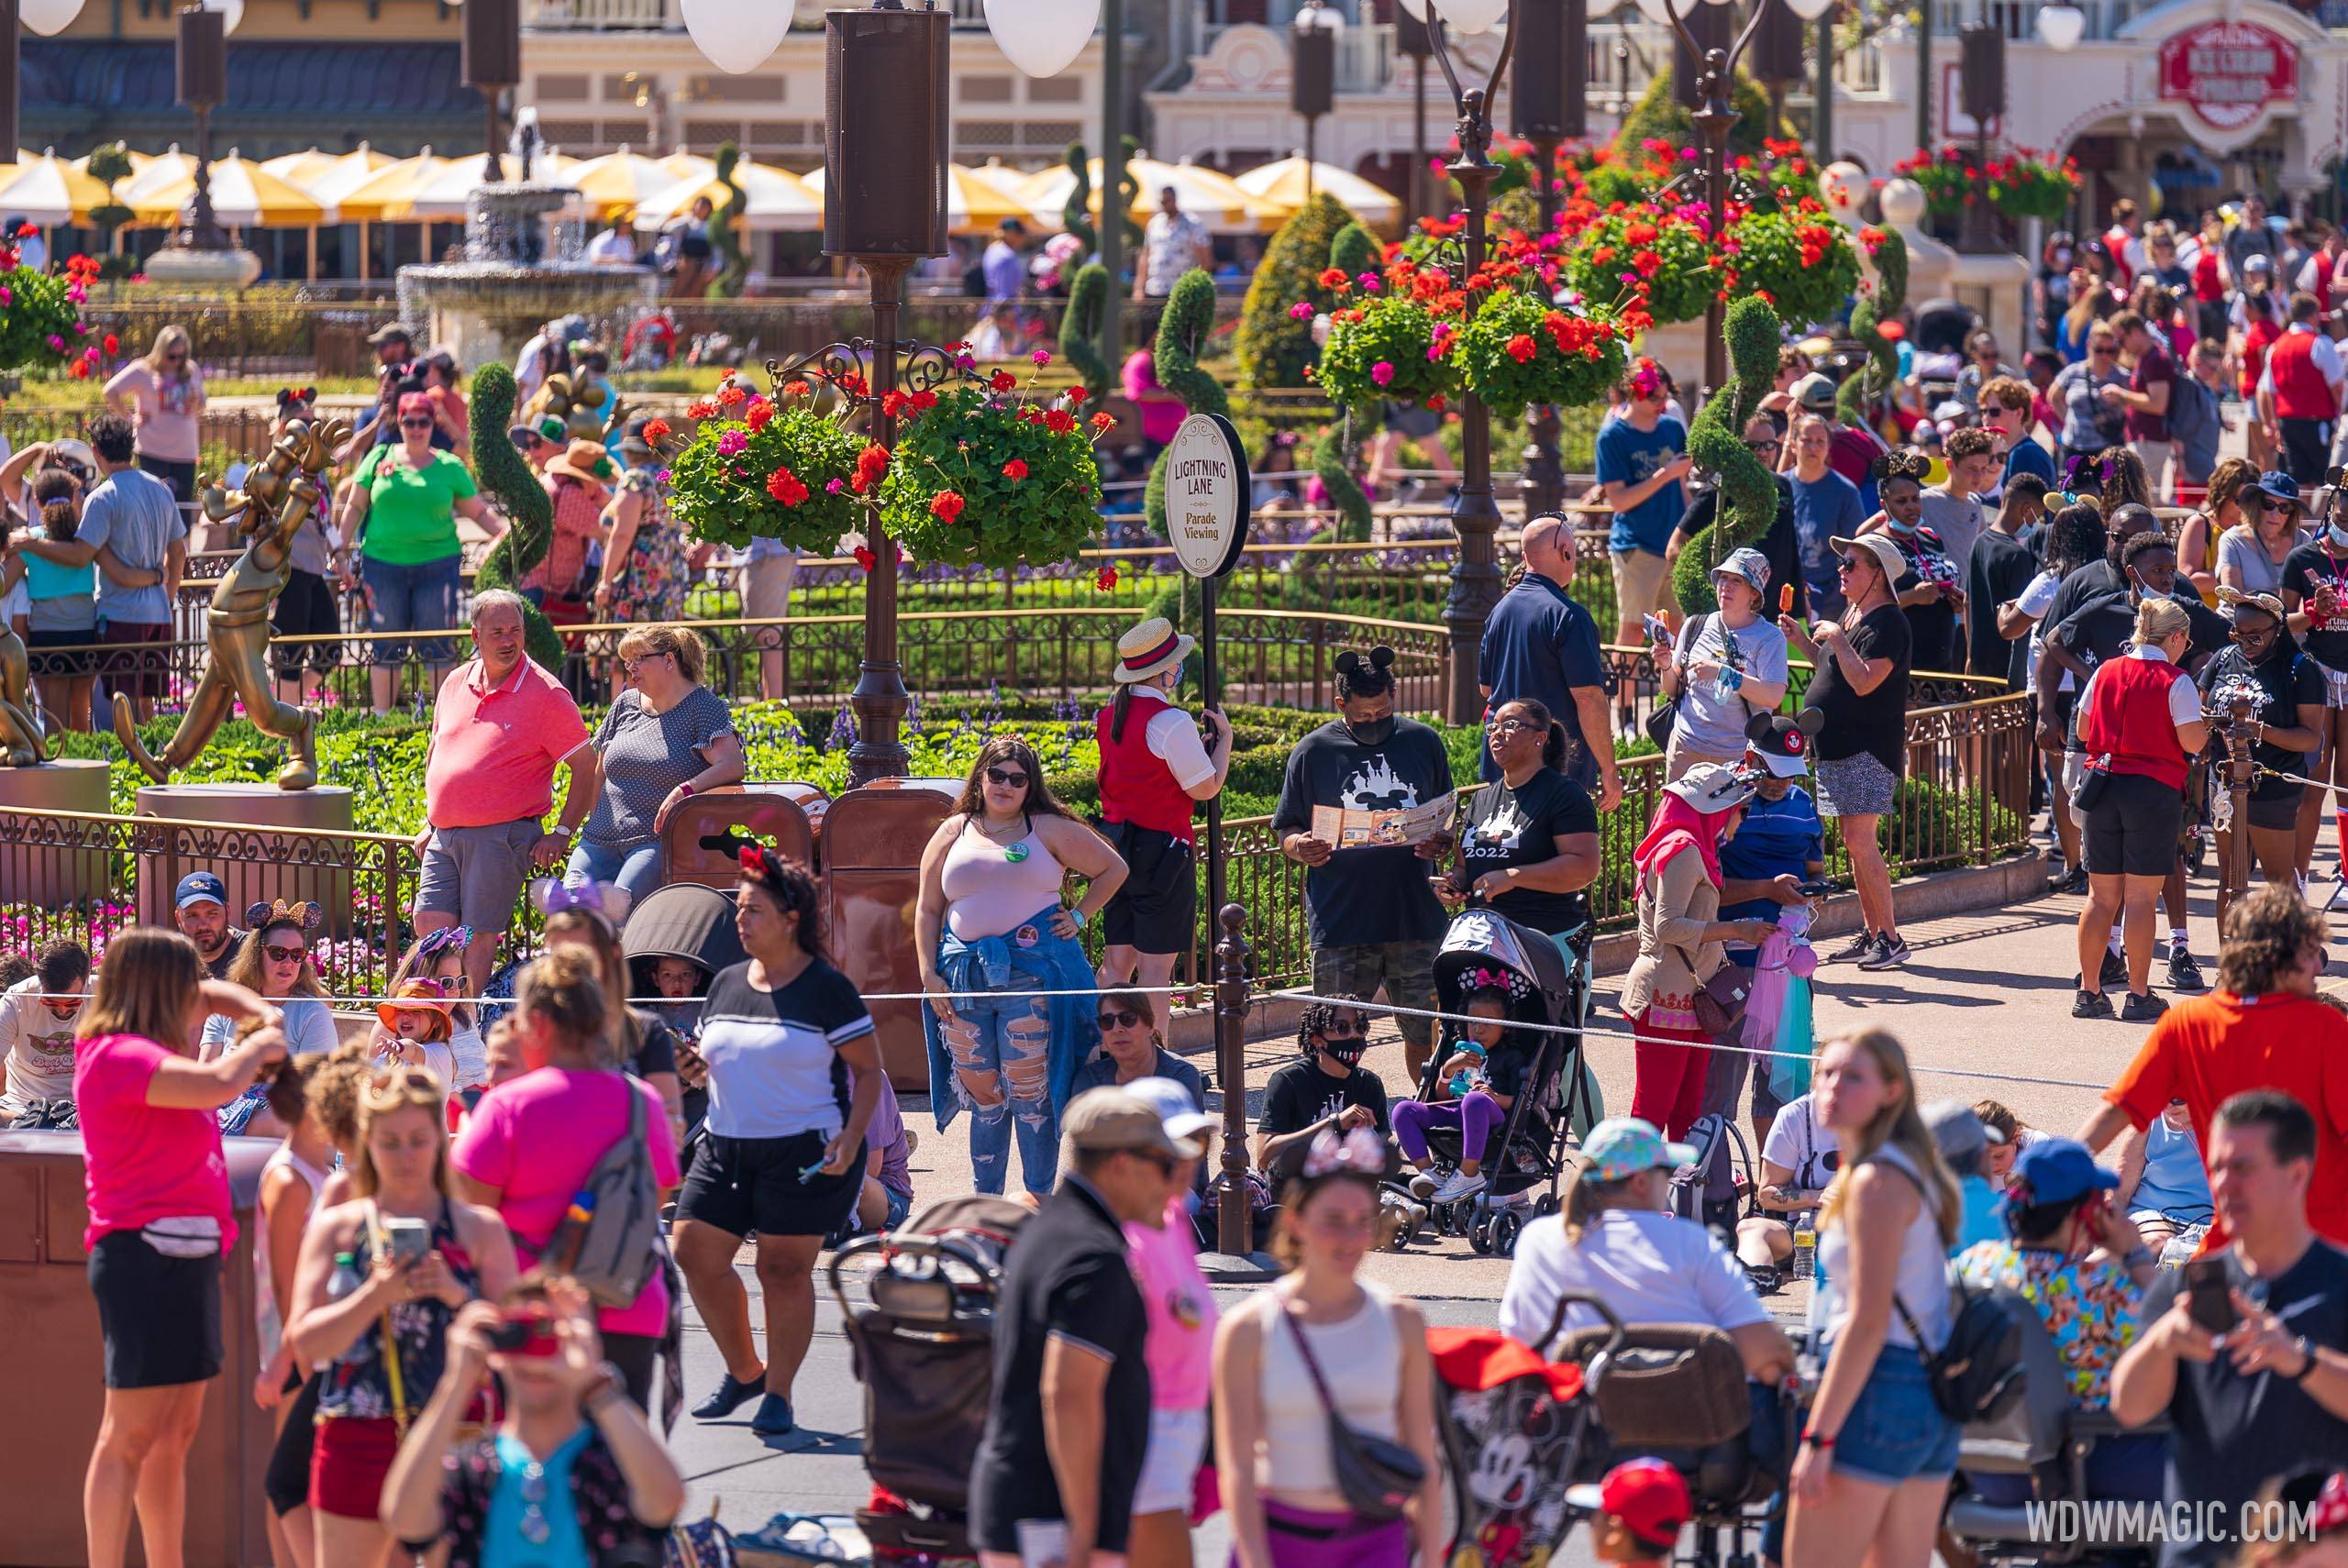 Most guests in the Festival of Fantasy Parade Lighting Lane viewing area will have a front row position